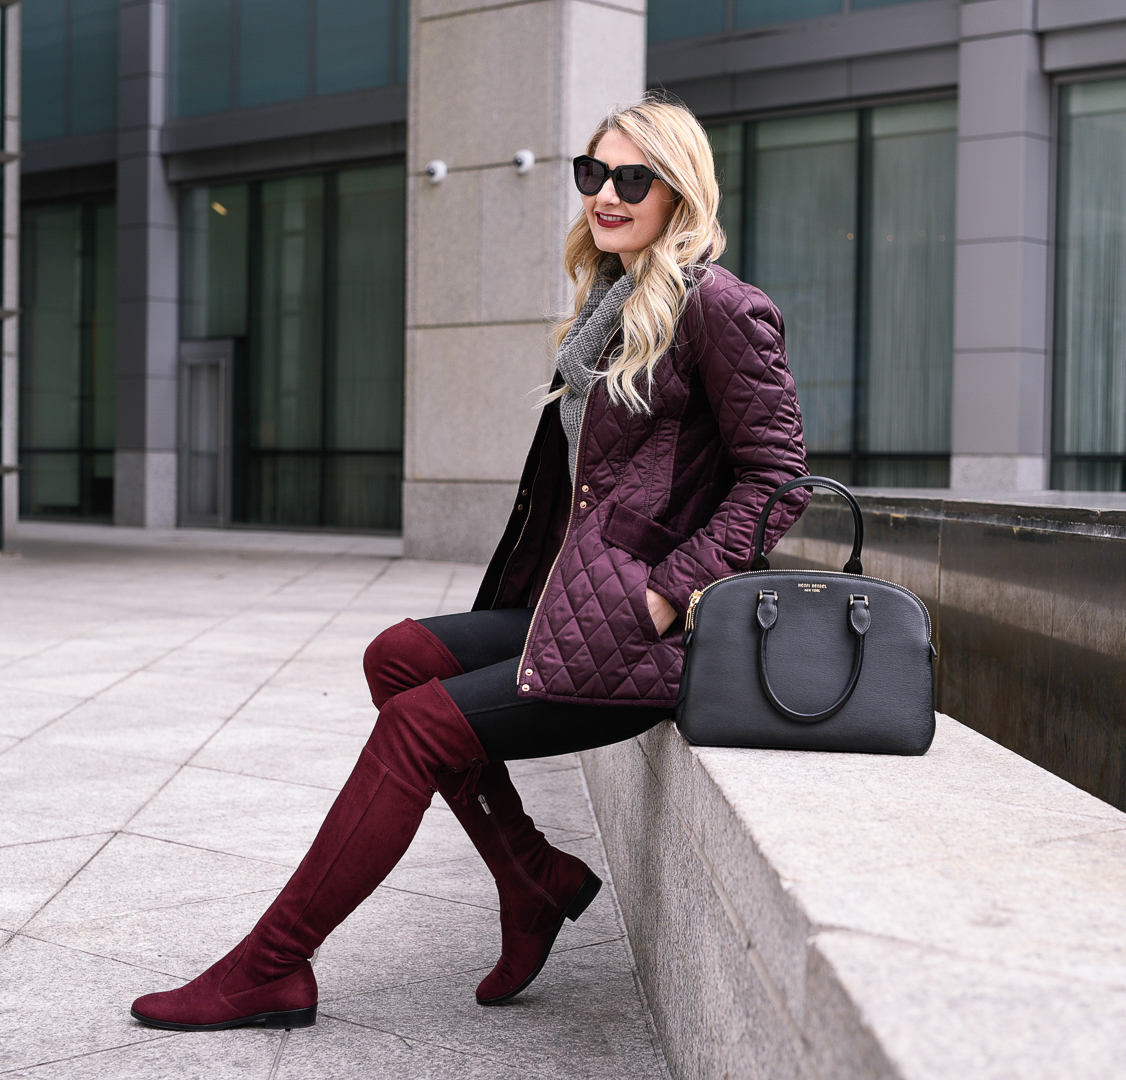 Burgundy suede otk boots and a quilted purple jacket. 